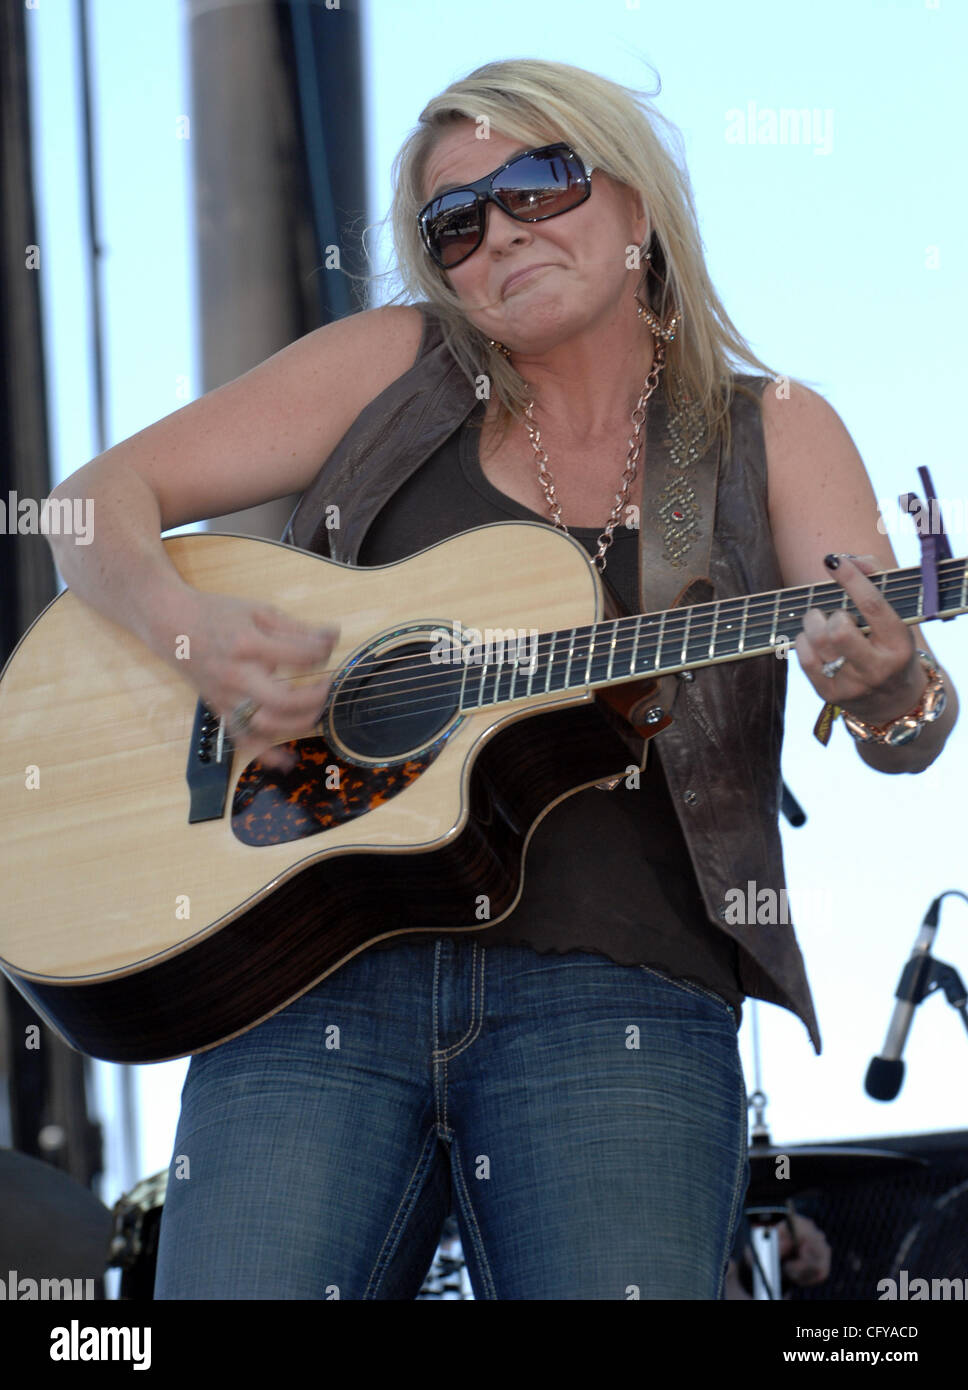 May 6, 2007  Indio, CA; USA, Musician CAROLYN DAWN JOHNSON performs live as part of the first annual Stagecoach Country Music Festival that took place at Empire Polo Field located in Indio.  The Stagecoach festival attracts music fans from all of over the country to see there favorite artist on four Stock Photo